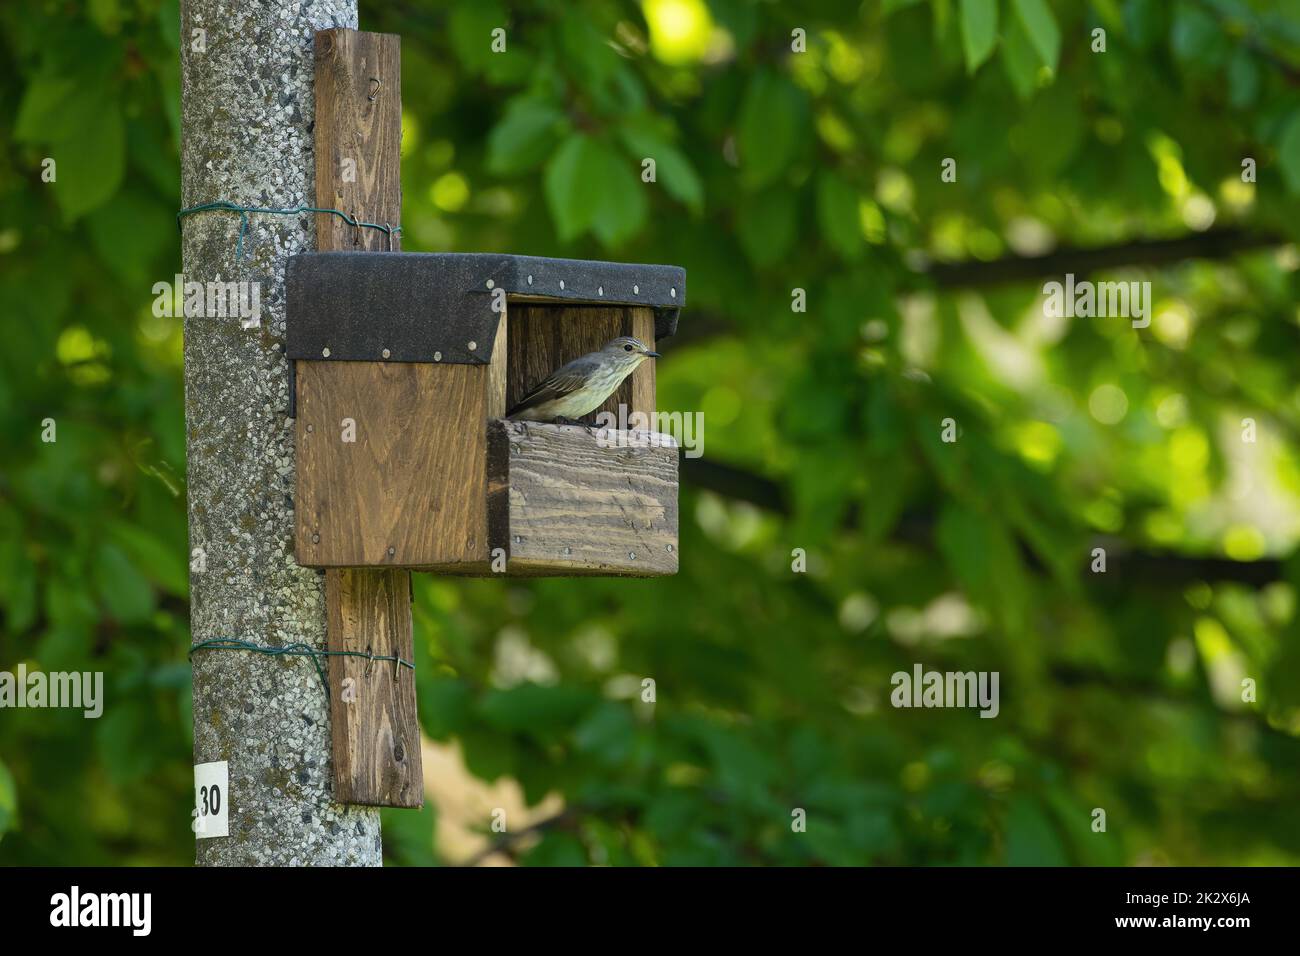 Spotted flycatcher sitting in an birdbox attached to a pole in a city Stock Photo